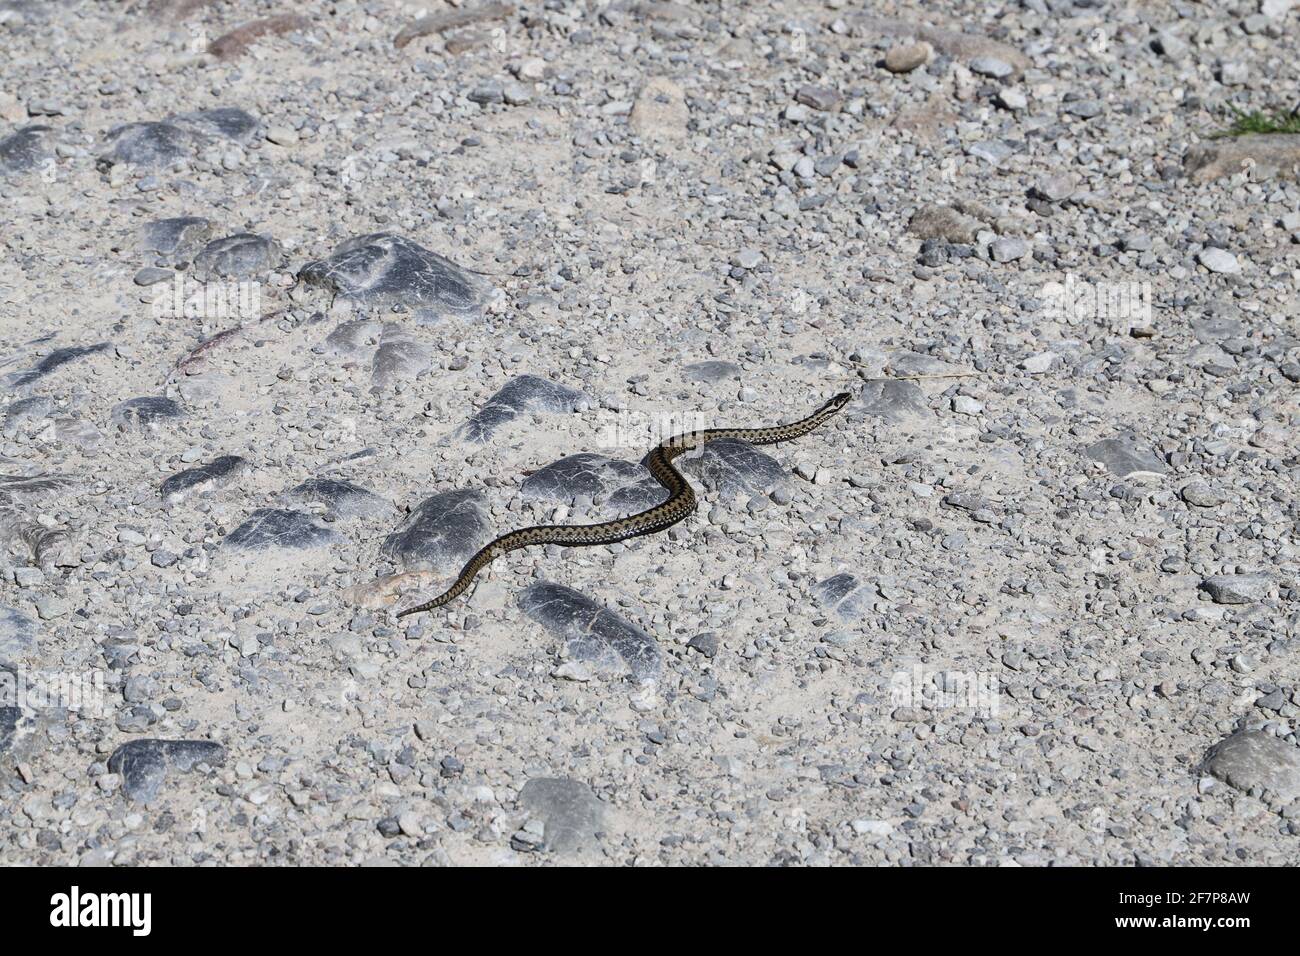 A gray snake on the hiking trail in the Koscieliska valley in the Western Tatras. Animals of the Tatra National Park, Poland Stock Photo